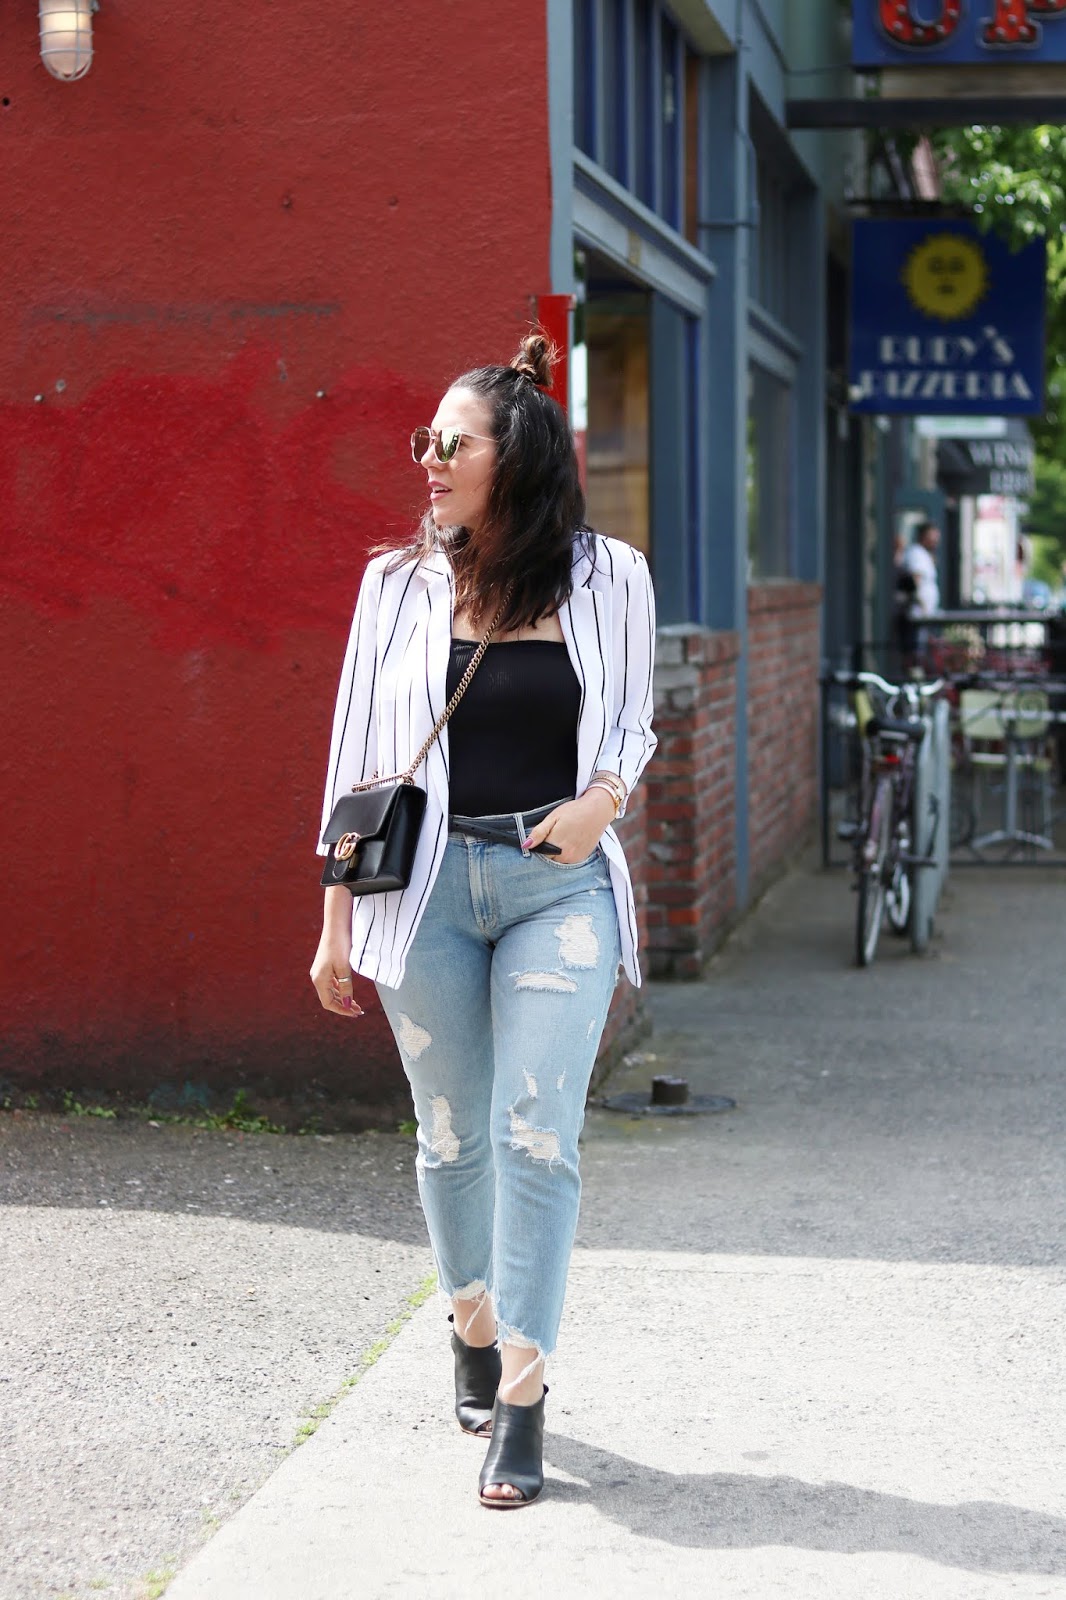 Black and white striped blazer outfit le chateau mother premium jeans tube top vancouver fashion blogger aleesha harris